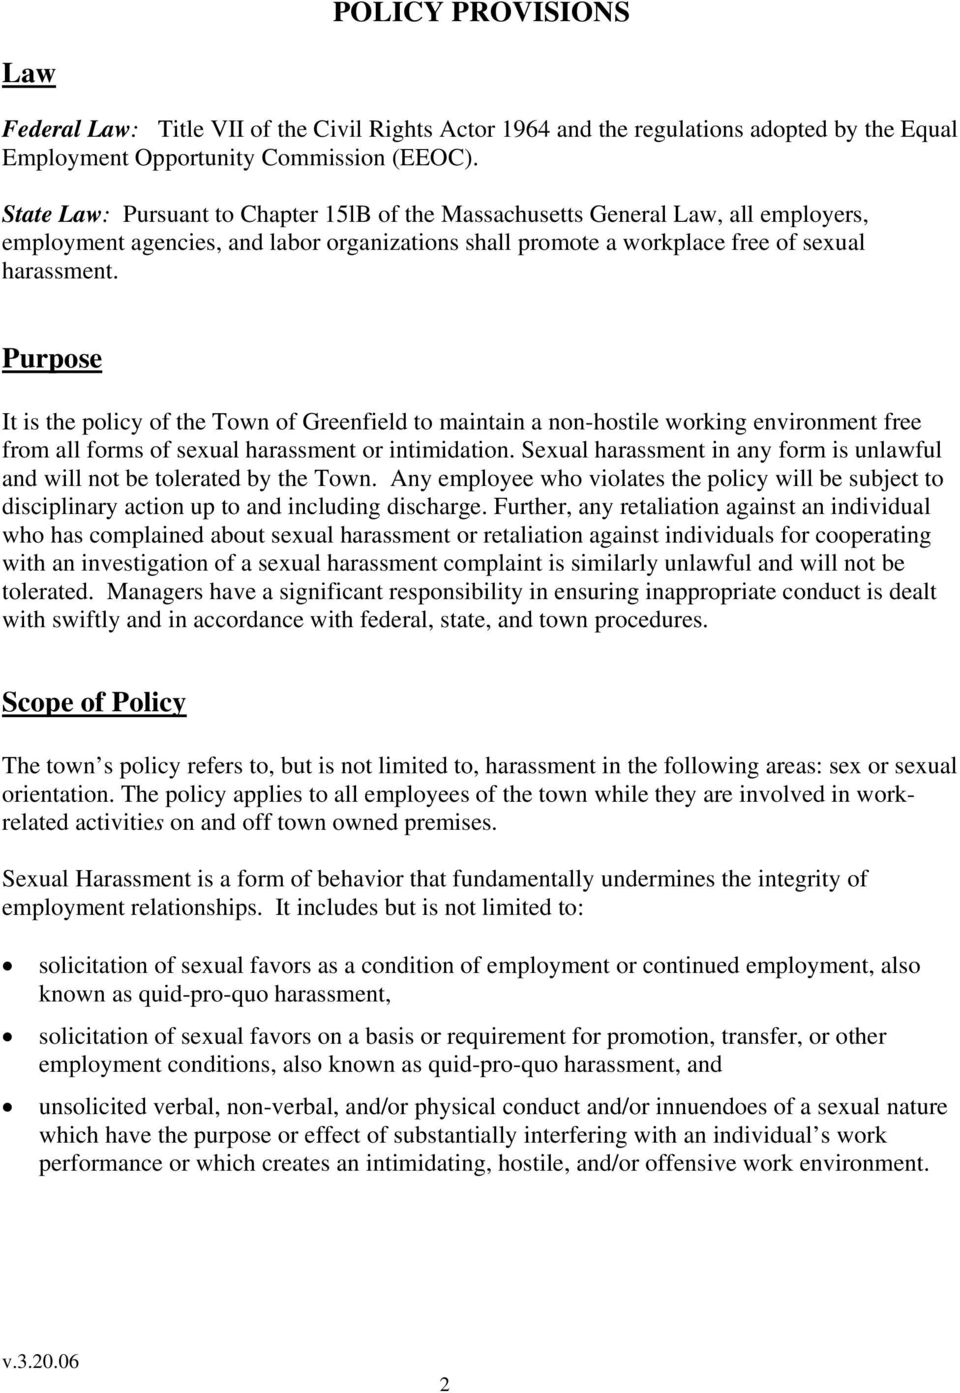 Purpose It is the policy of the Town of Greenfield to maintain a non-hostile working environment free from all forms of sexual harassment or intimidation.